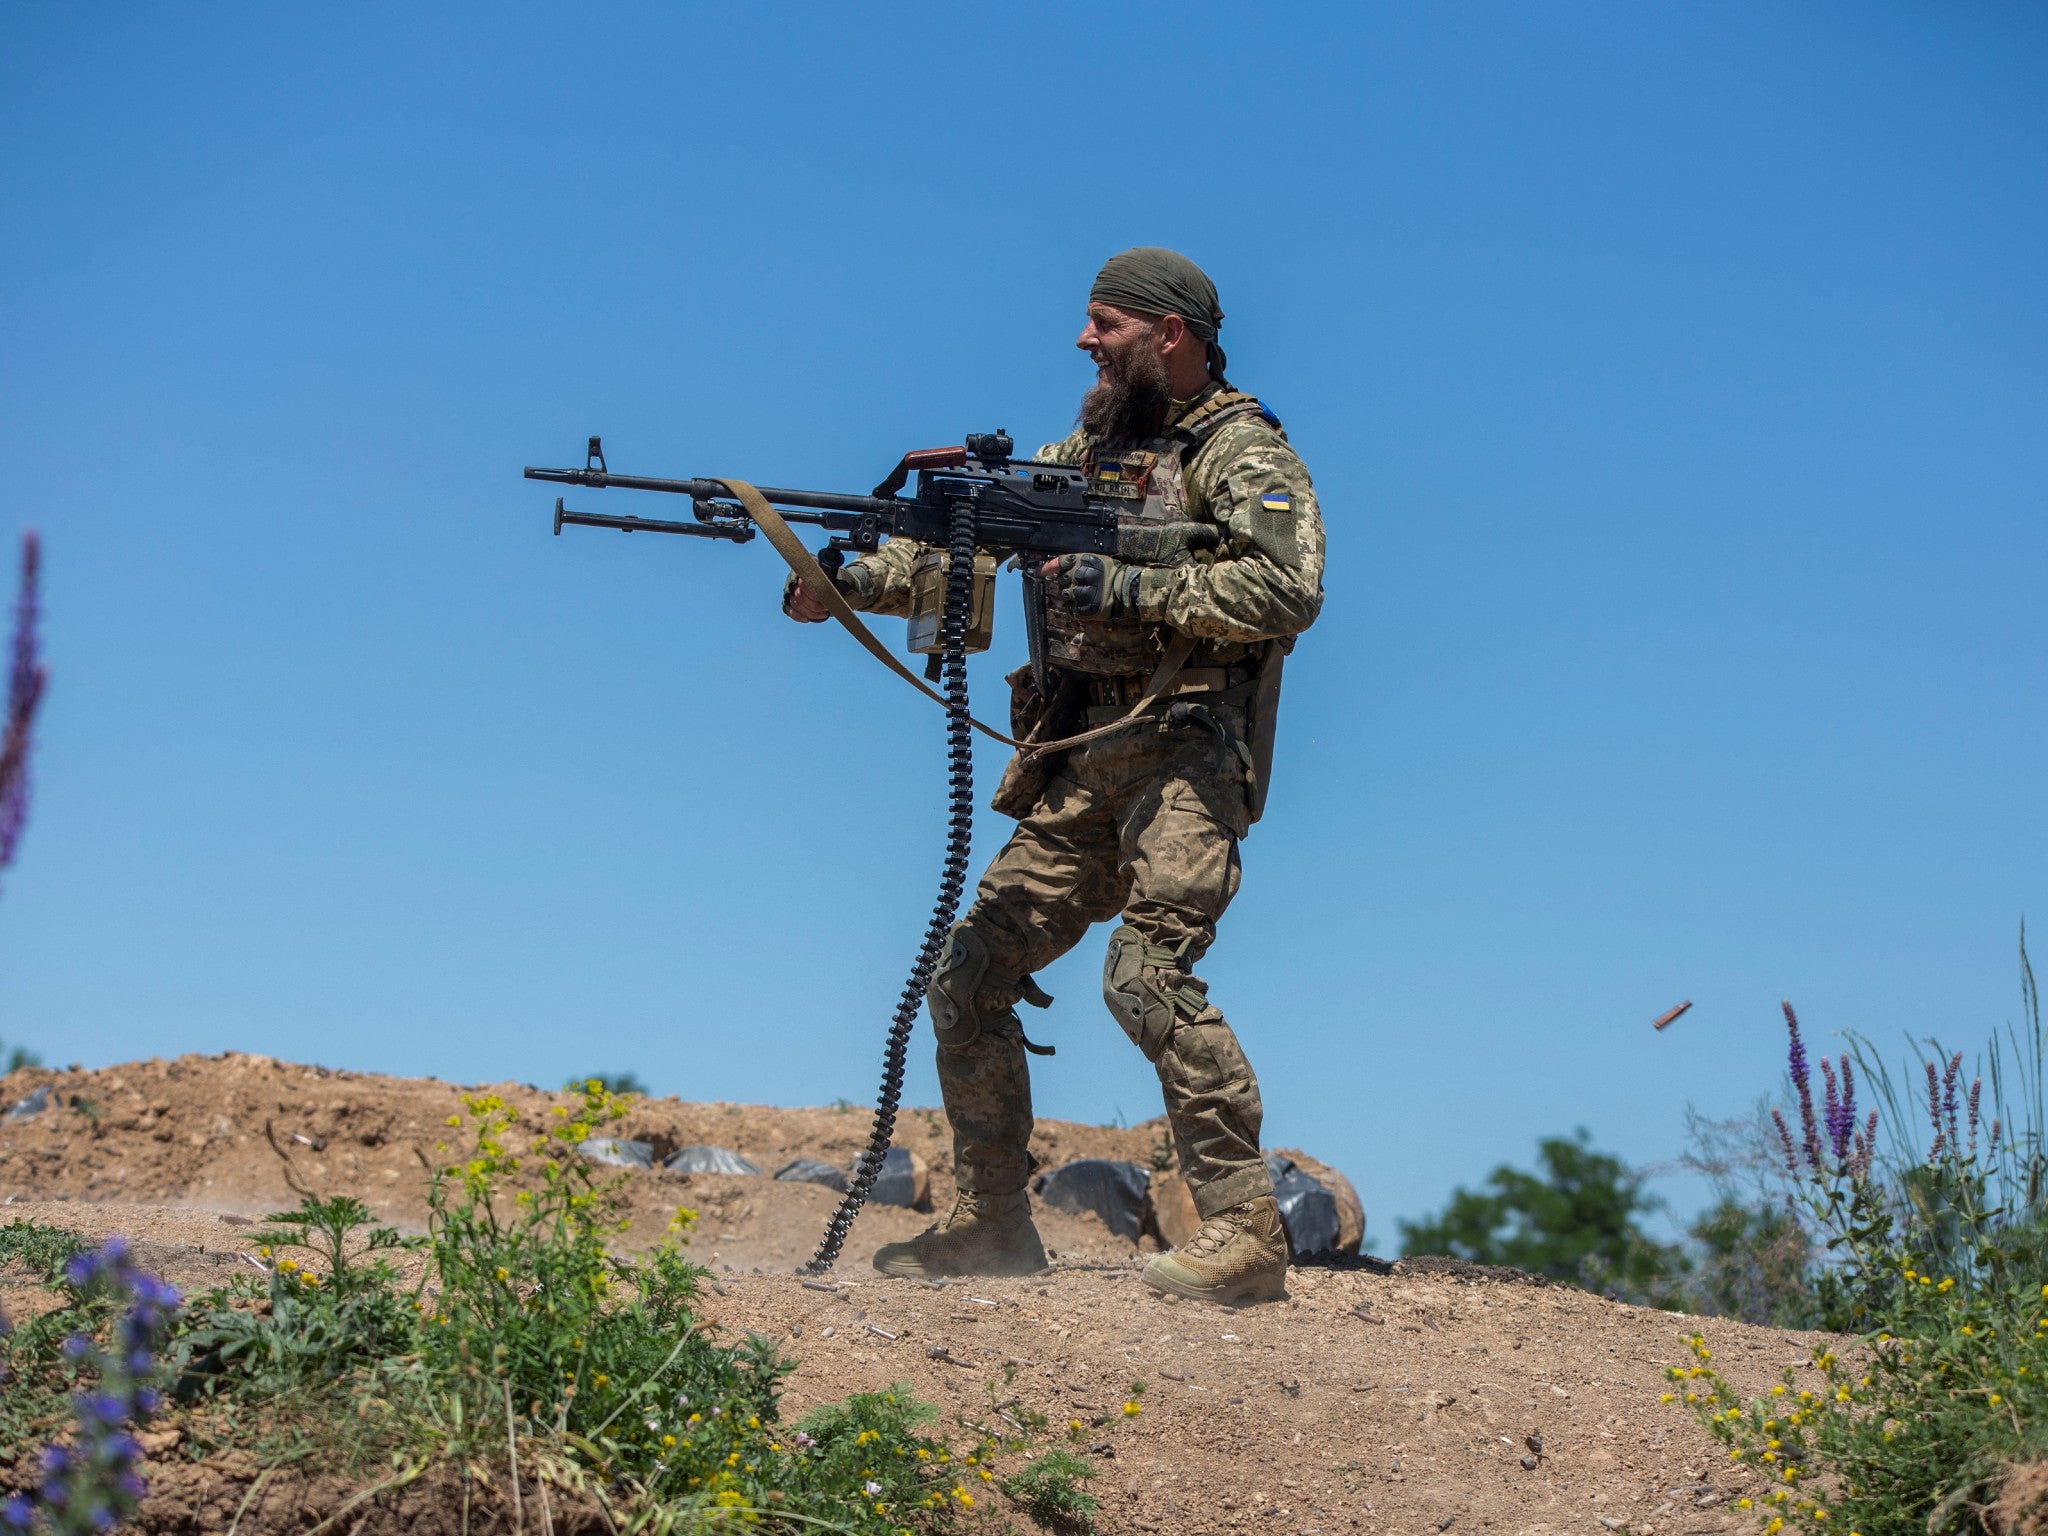 A Ukrainian soldier fires a machine gun at a training ground near the front line in Donetsk